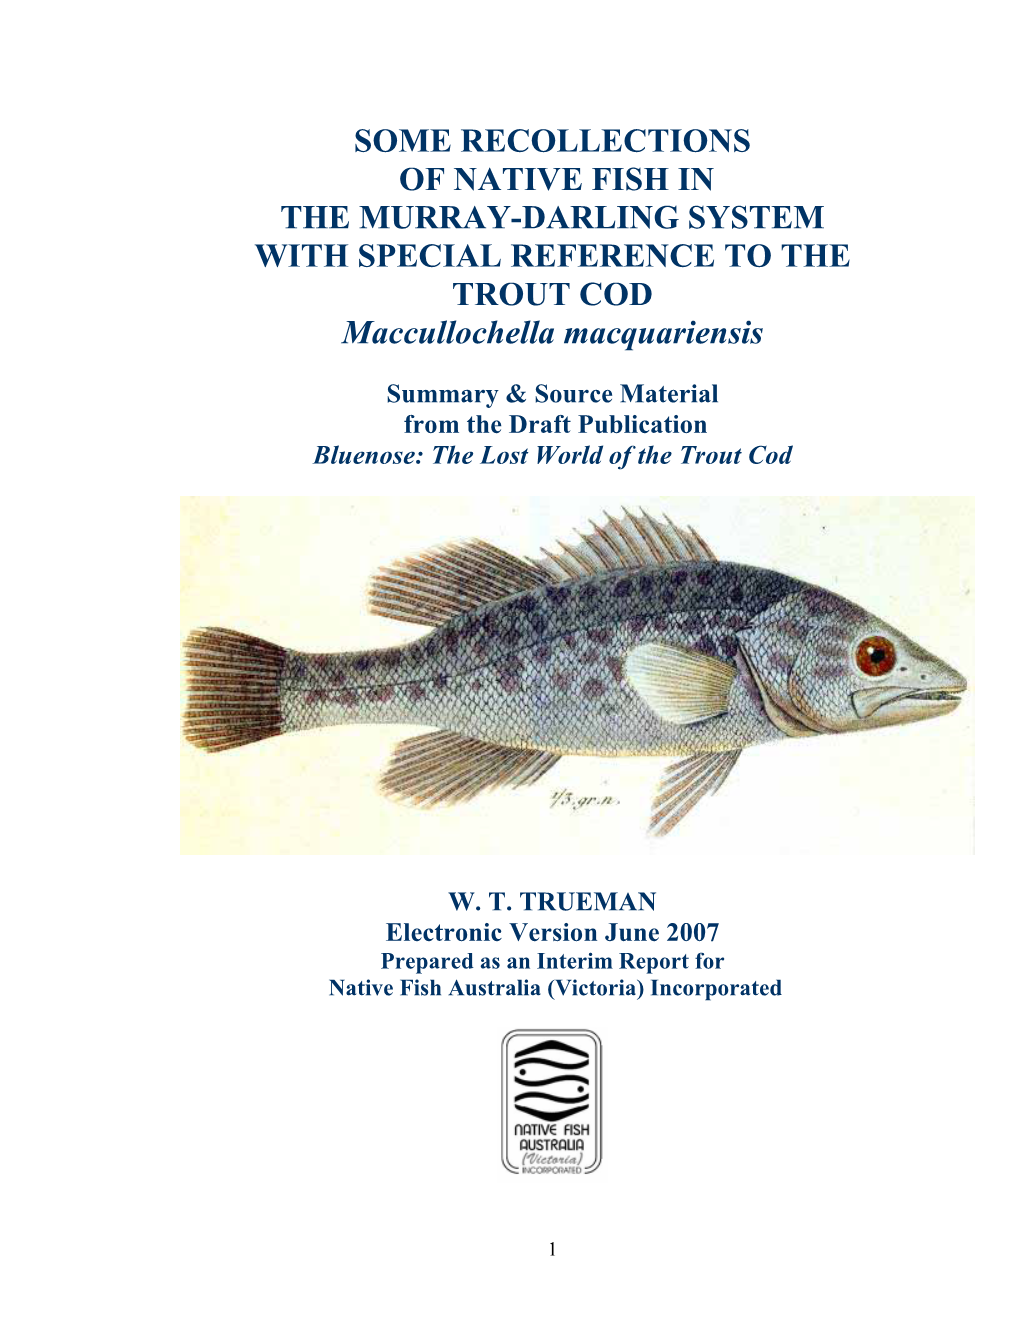 SOME RECOLLECTIONS of NATIVE FISH in the MURRAY-DARLING SYSTEM with SPECIAL REFERENCE to the TROUT COD Maccullochella Macquariensis